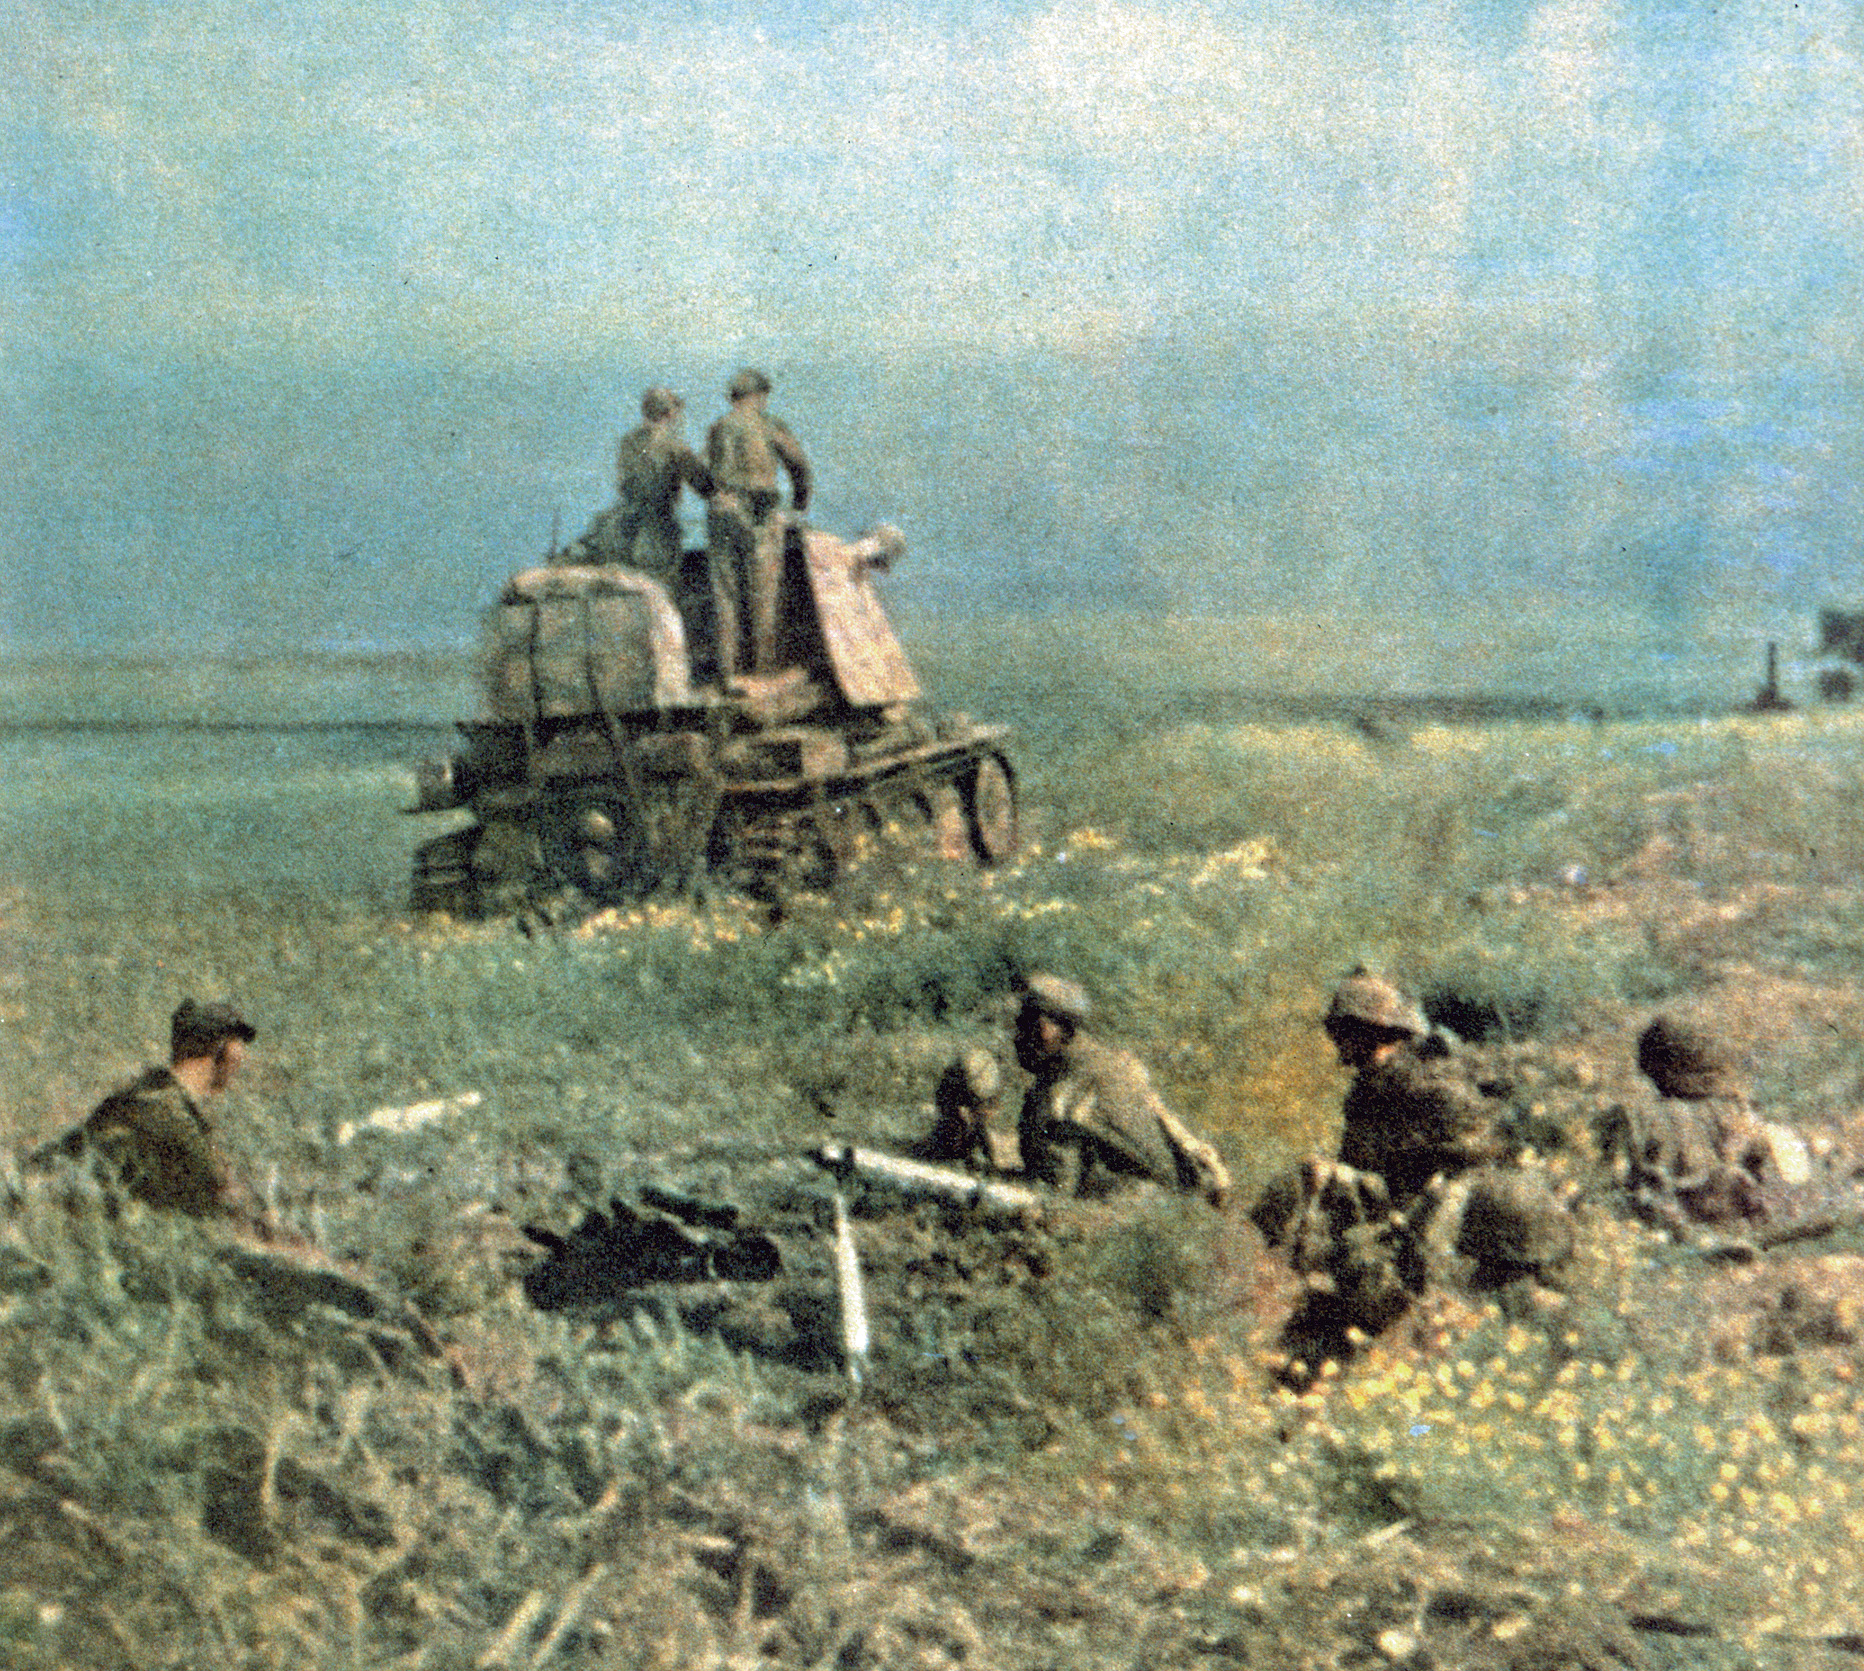 German artillery counterattacks near Belgorod after a breakthrough by Russian tanks. In the foreground are Waffen-SS troops with Red Army prisoners.